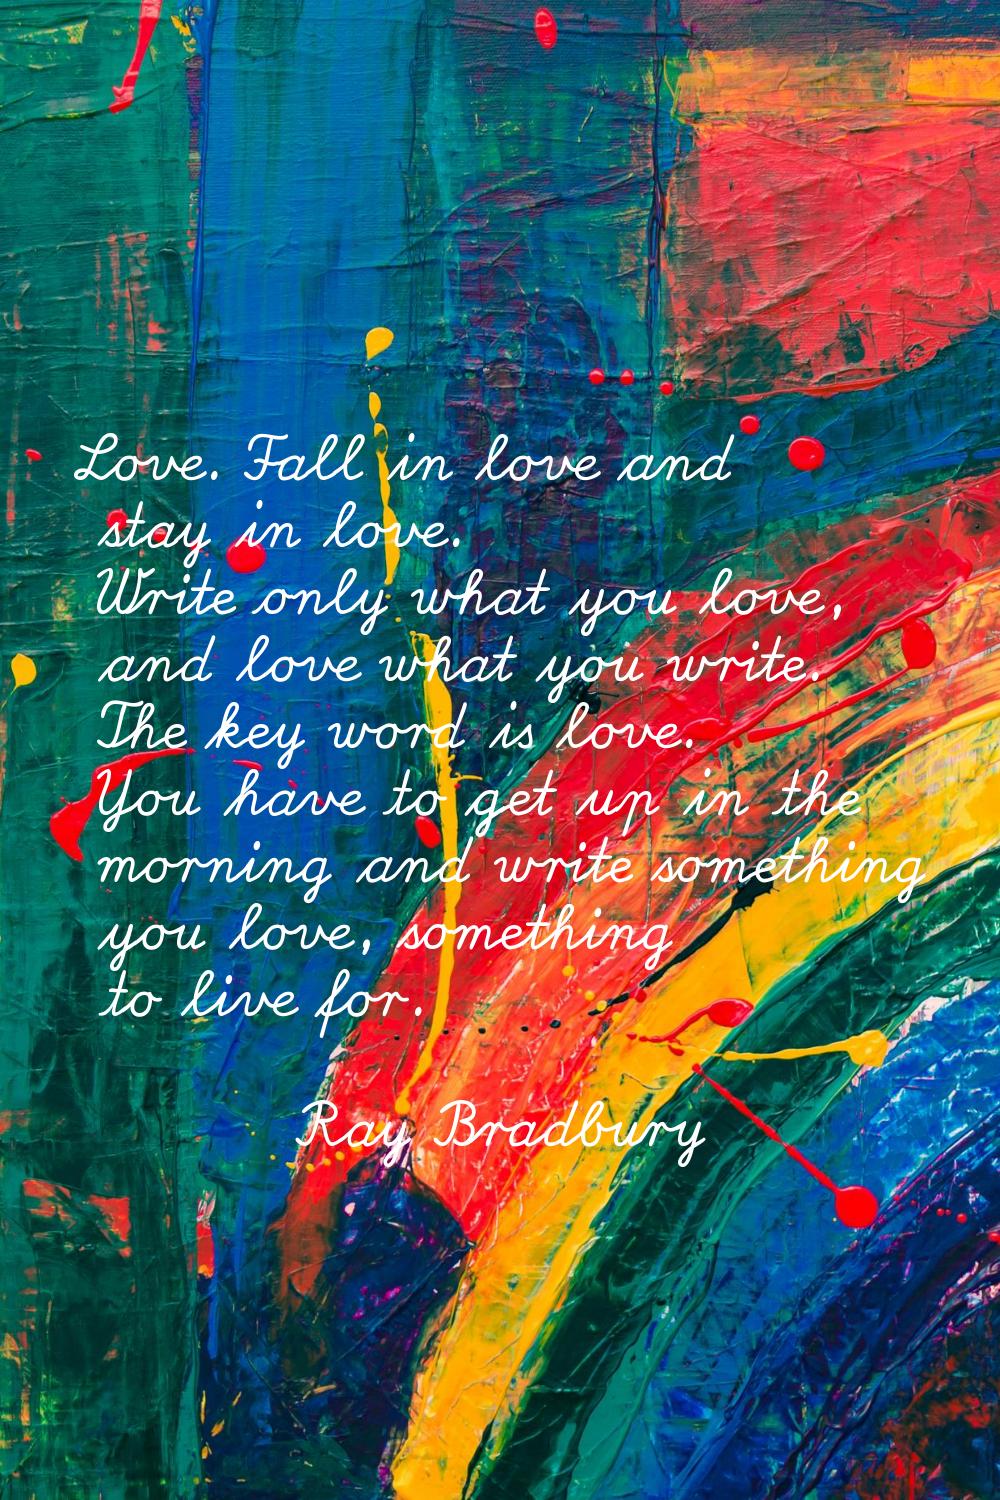 Love. Fall in love and stay in love. Write only what you love, and love what you write. The key wor